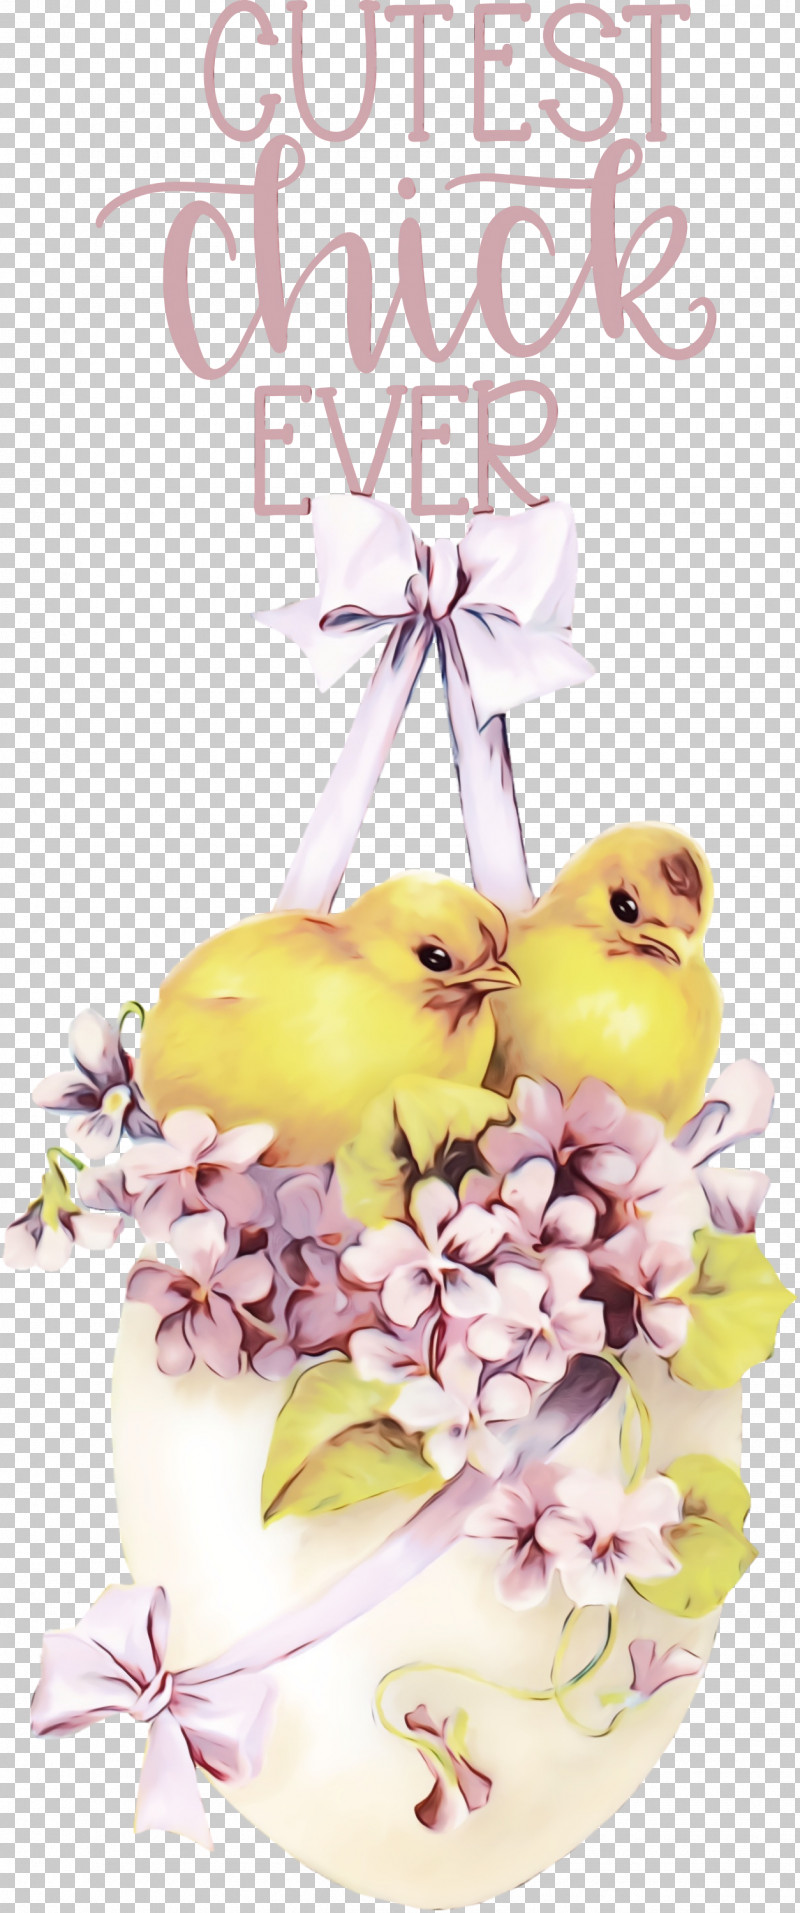 Floral Design PNG, Clipart, Cartoon, Chicken And Ducklings, Communication Design, Cut Flowers, Editing Free PNG Download